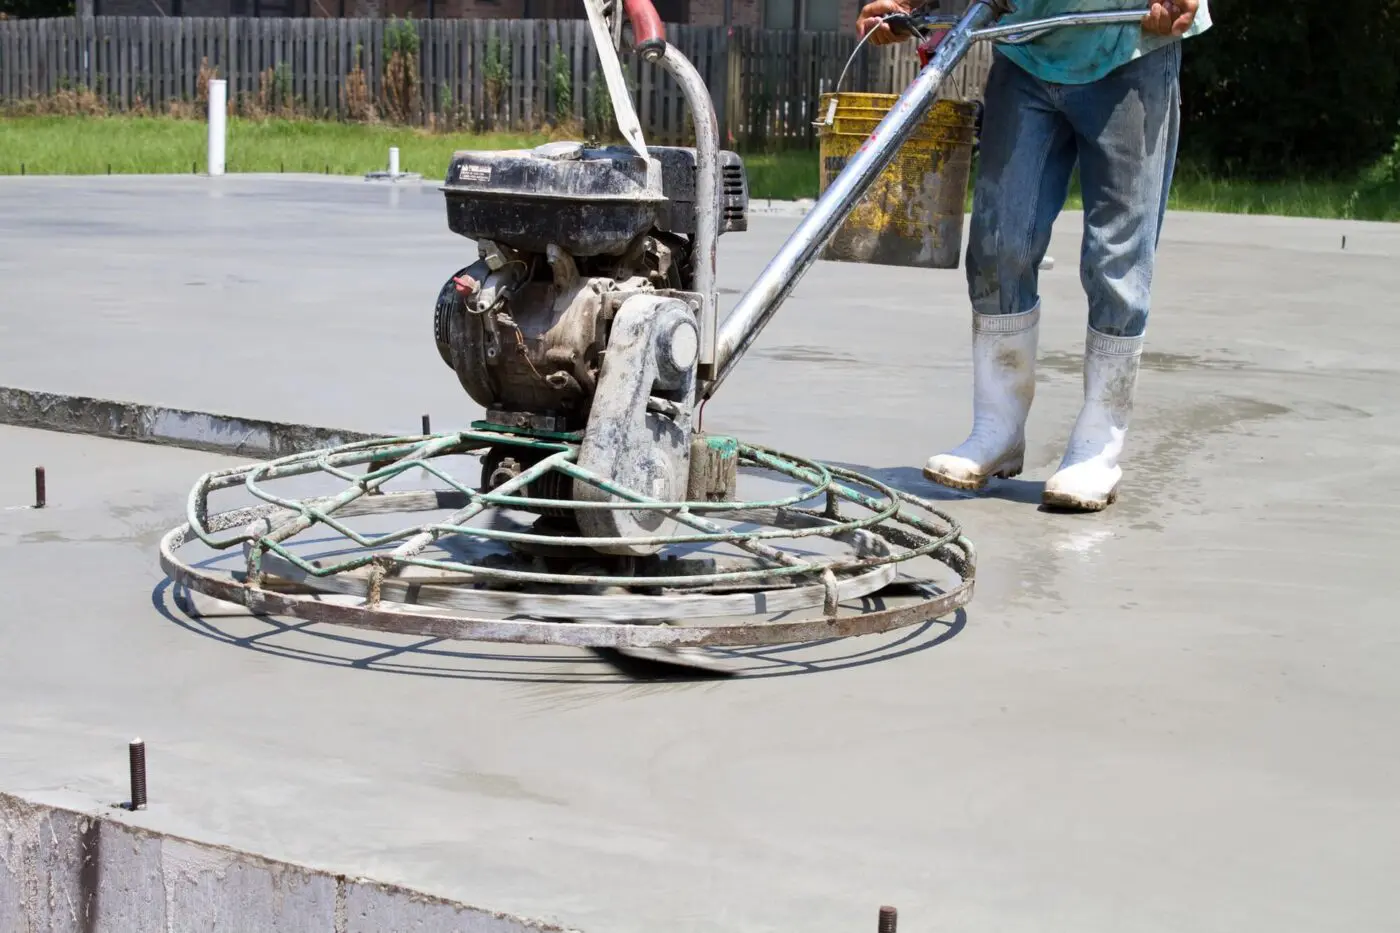 A worker in white rubber boots and jeans operates a power trowel to smooth the surface of a large concrete slab, ensuring all concrete needs are met. The worker holds onto the machine's handle with its rotating metal cage while standing on the freshly poured concrete. A fence is visible in the background.